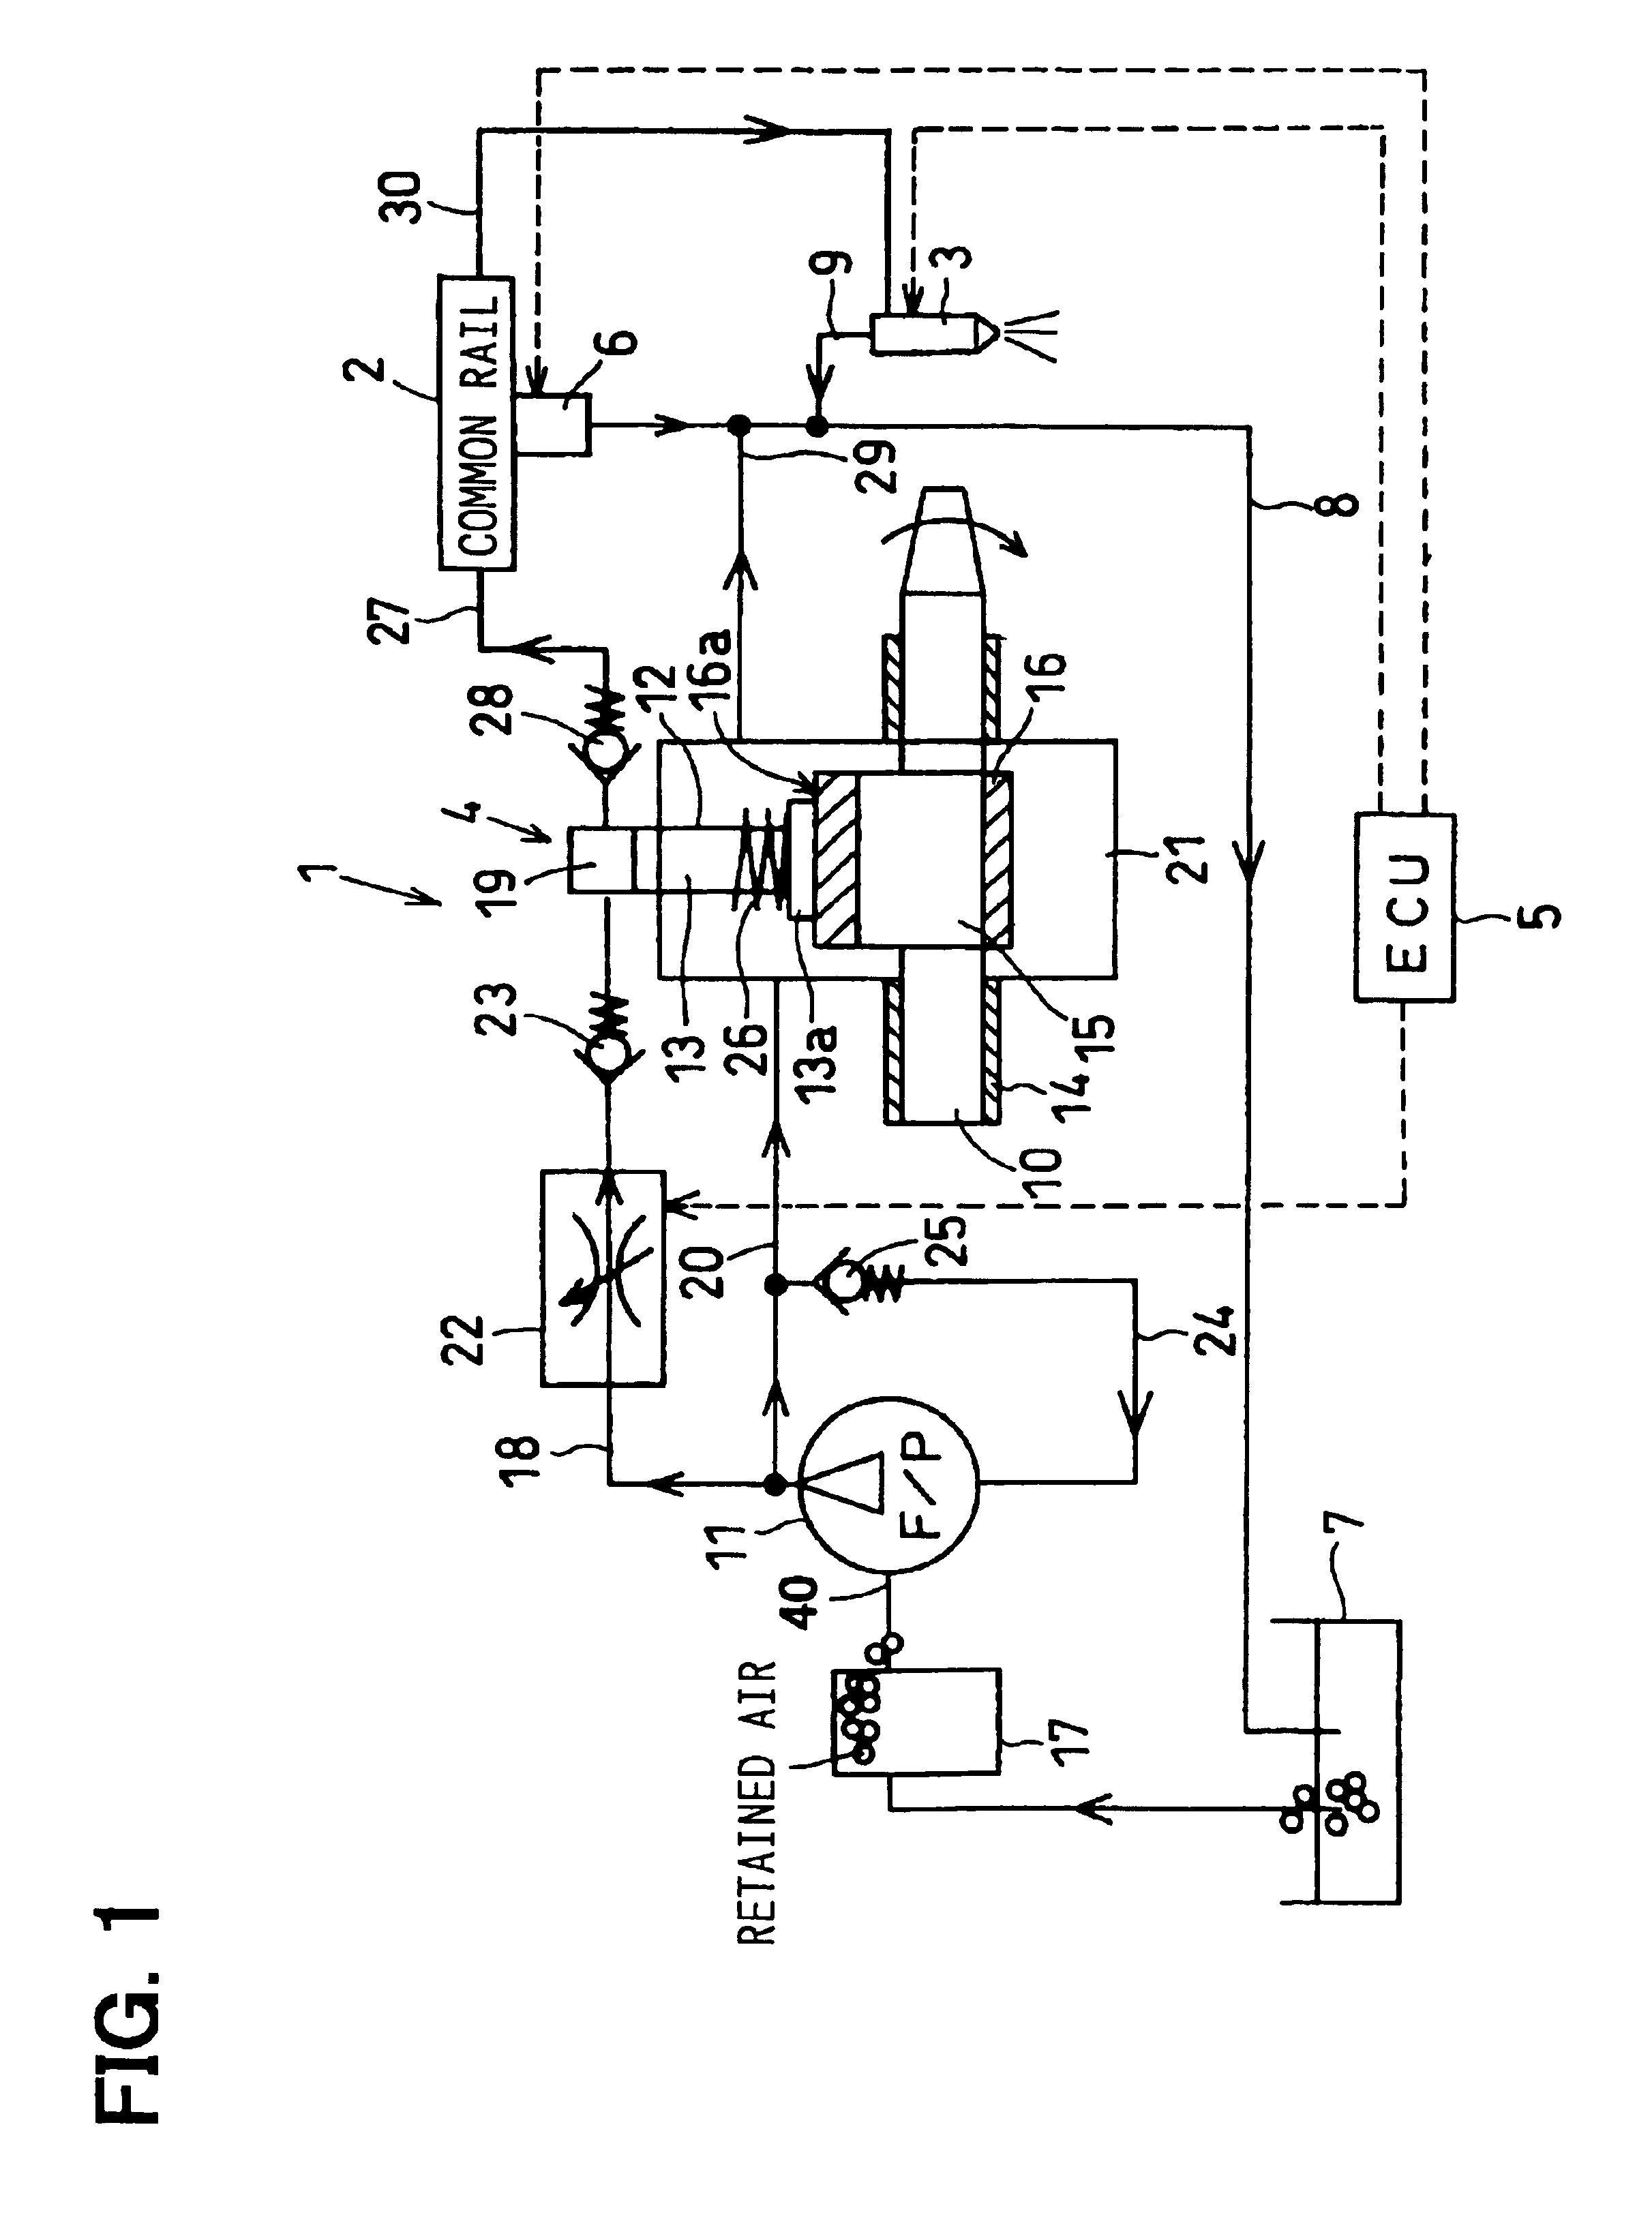 Common rail type fuel injection system